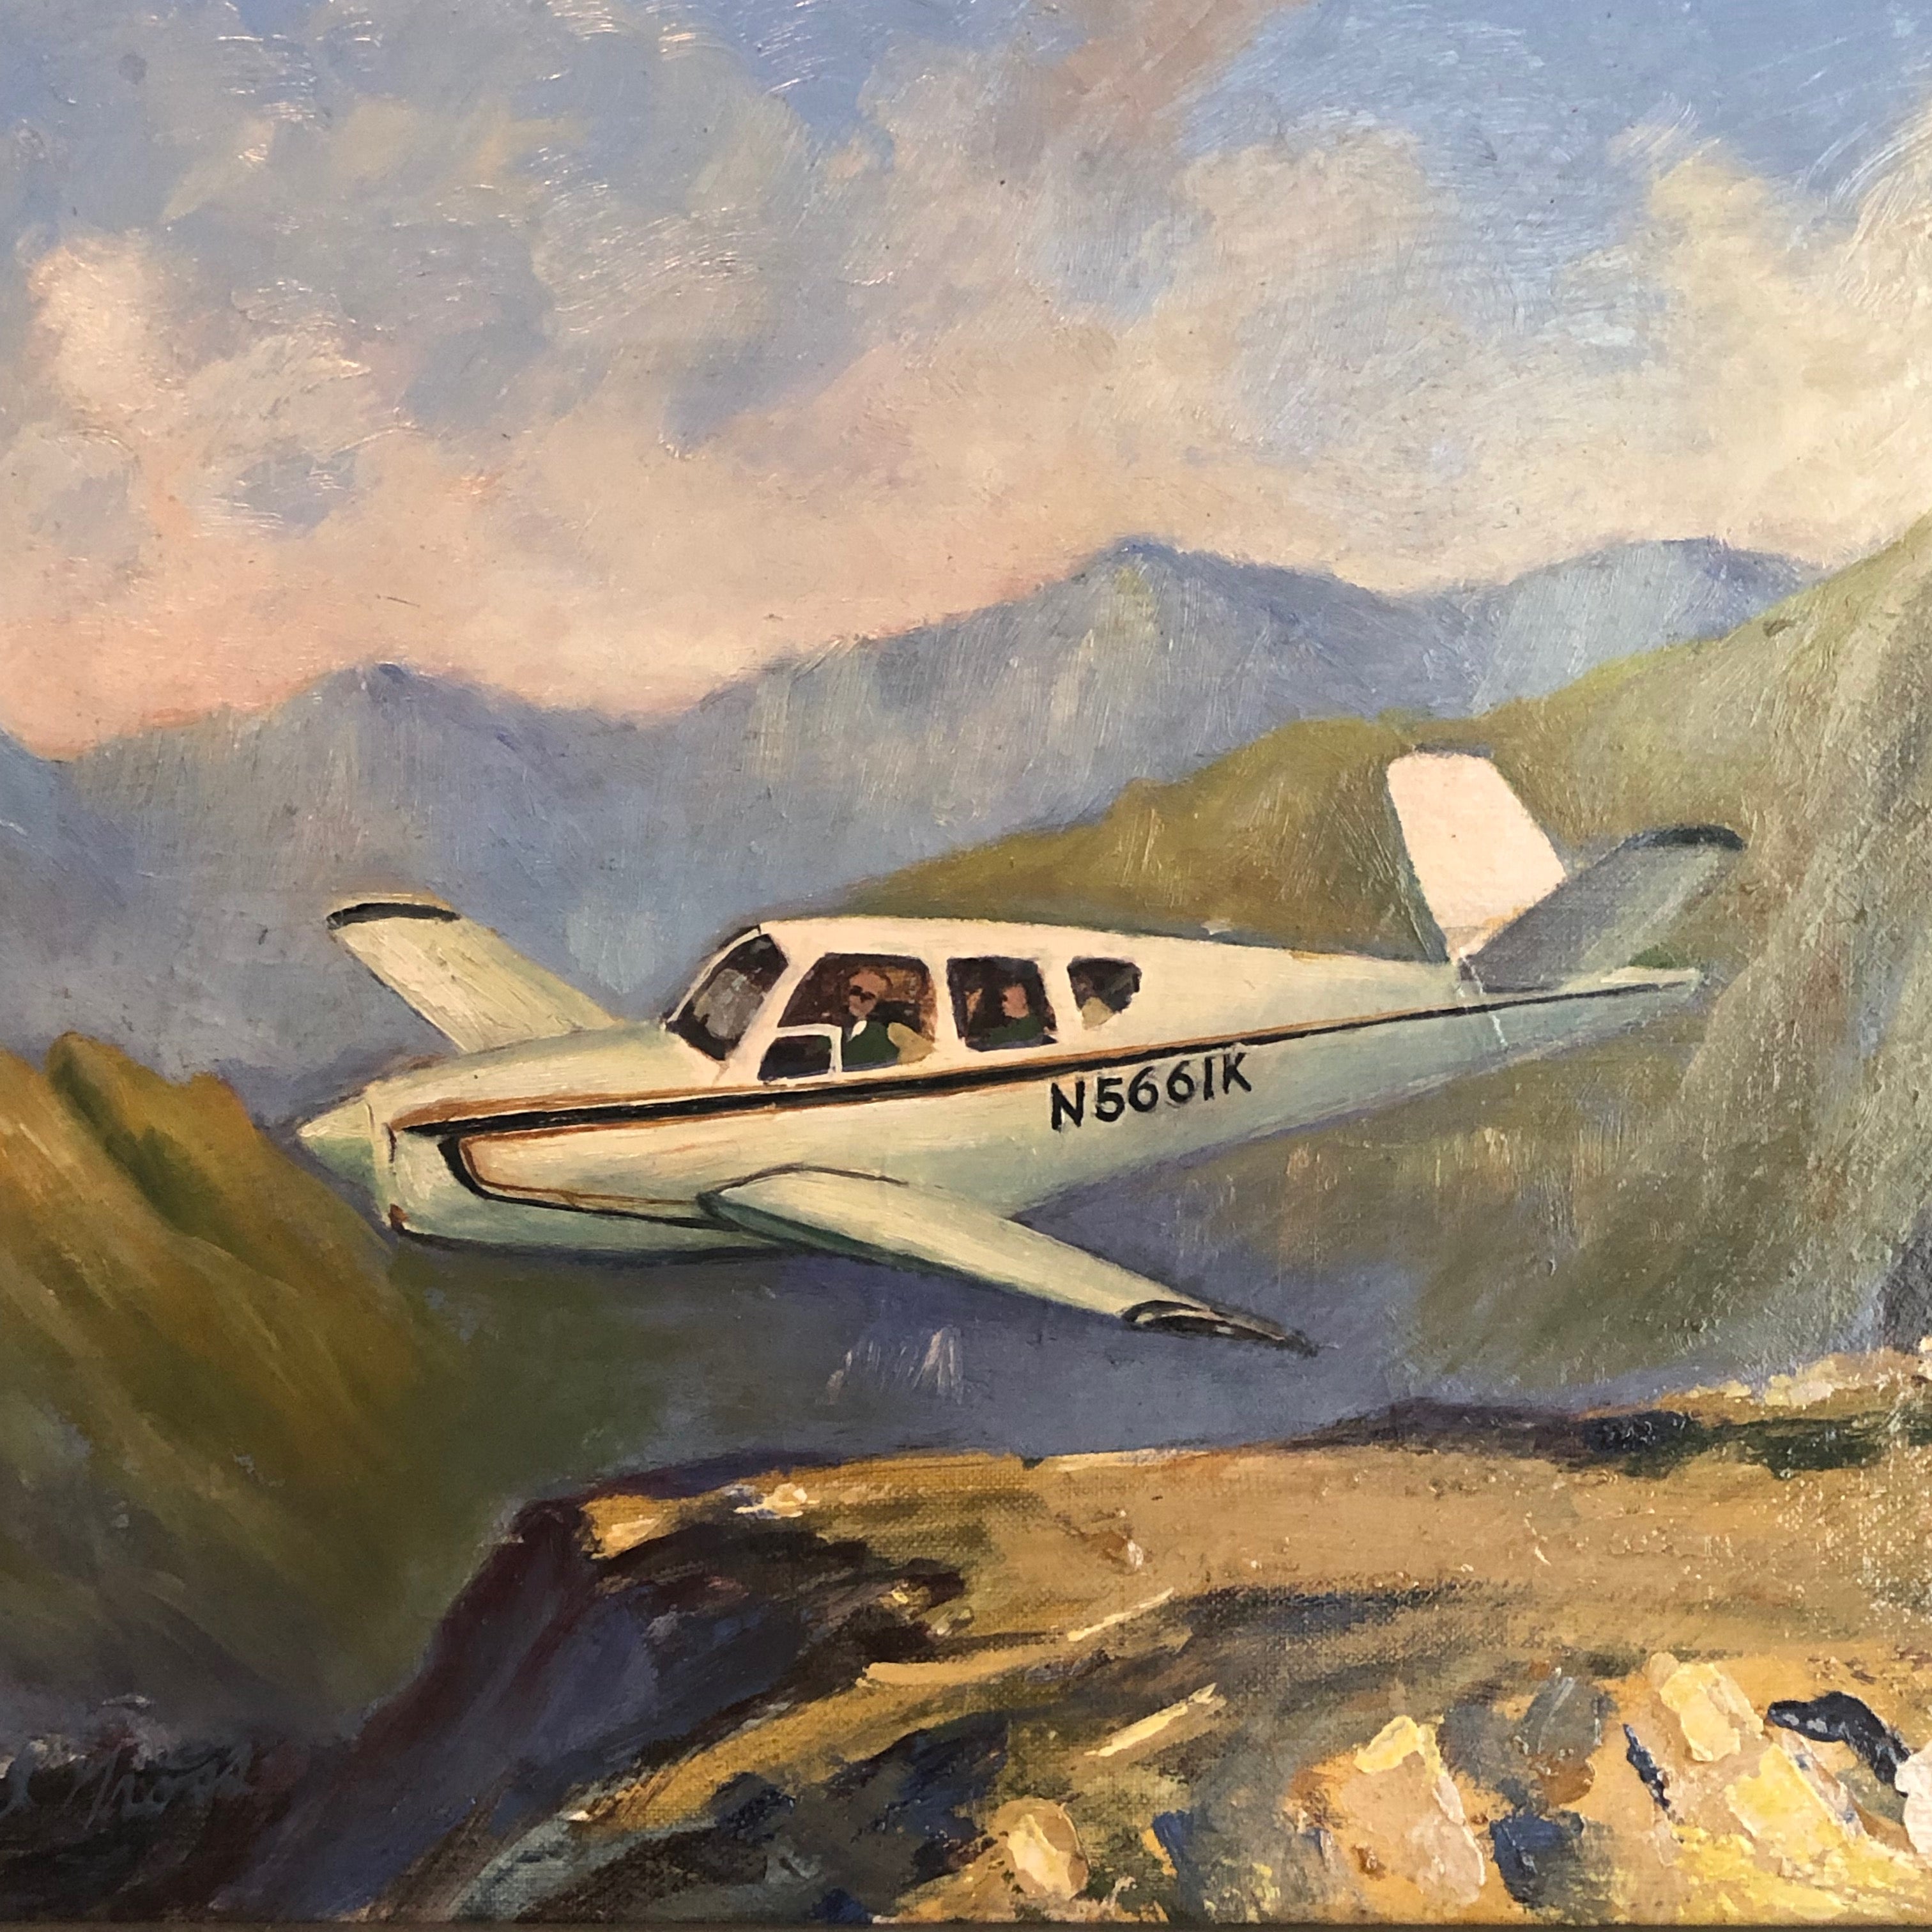 DB Cooper Artwork for Sale Painting by Earl Gross - Oil on Board - 1970s Signed by Listed Artist - "Wheels Up" - Notorious Unusual Art - Infamous Mystery